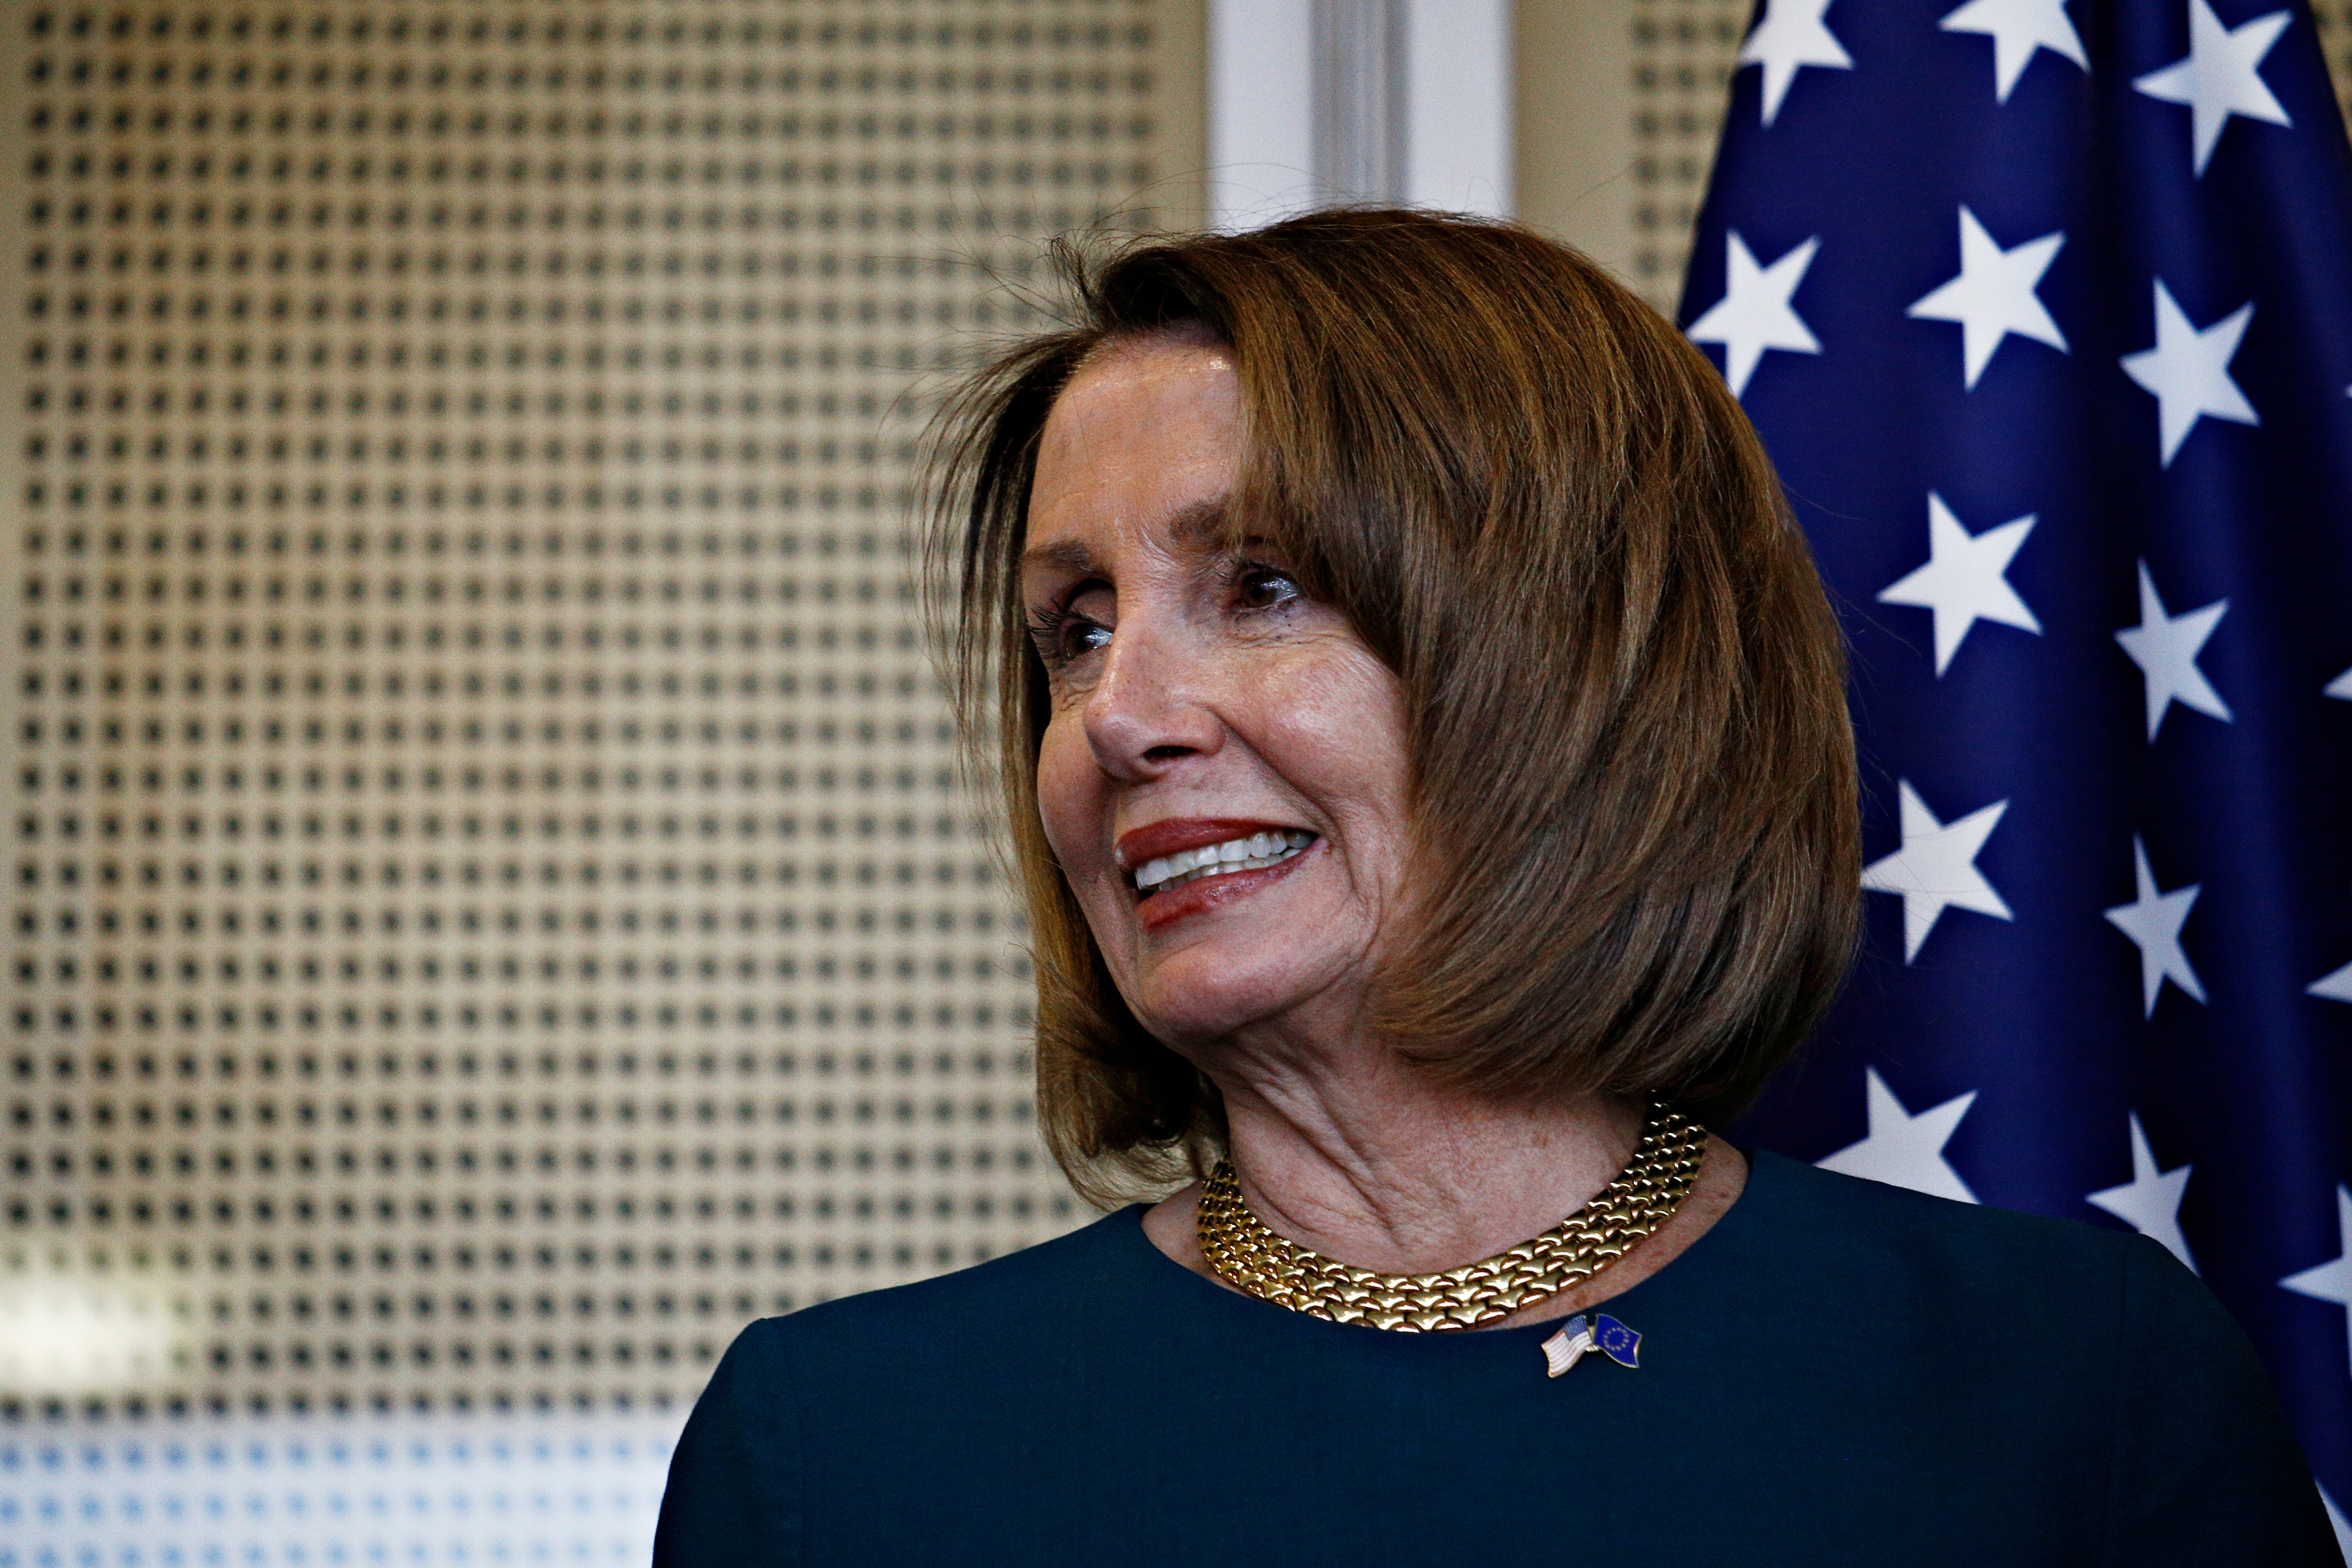 Nancy Pelosi Makes Trades In These 3 Tech Stocks: How She Booked $1.8M Profit On $110K